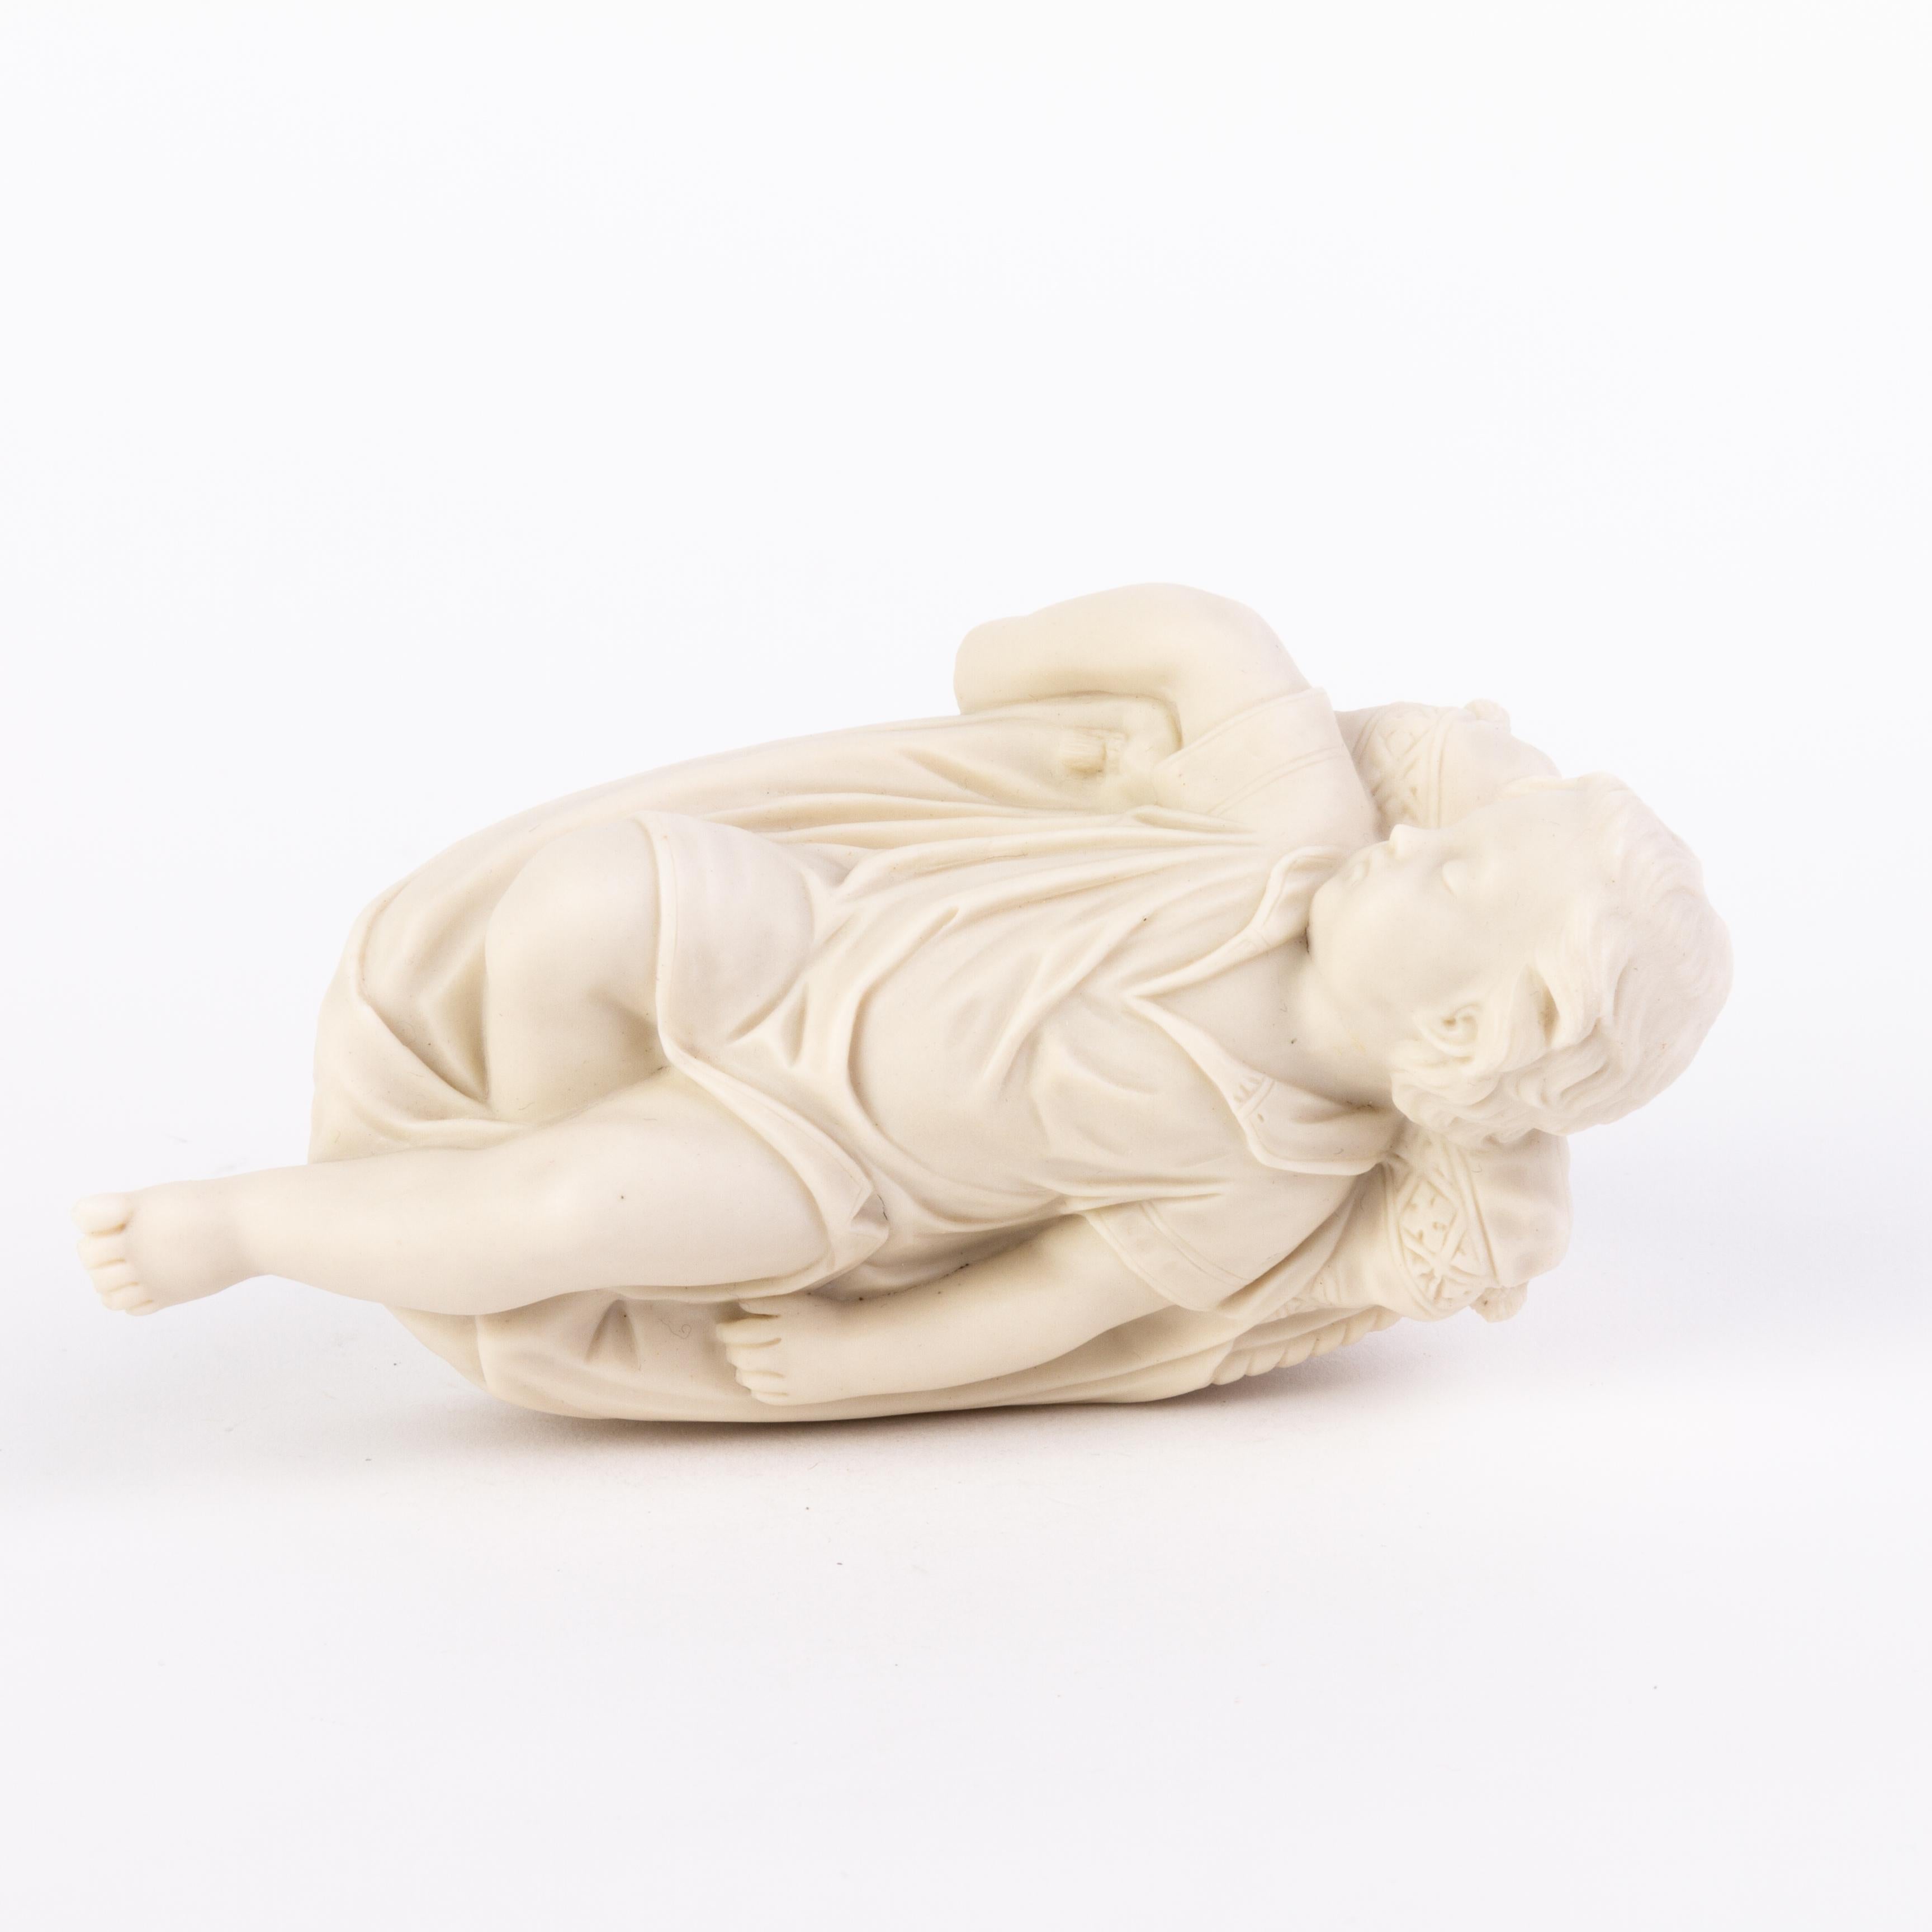 Victorian English Copeland Parian Ware Sleeping Child Statue 19th Century In Good Condition For Sale In Nottingham, GB